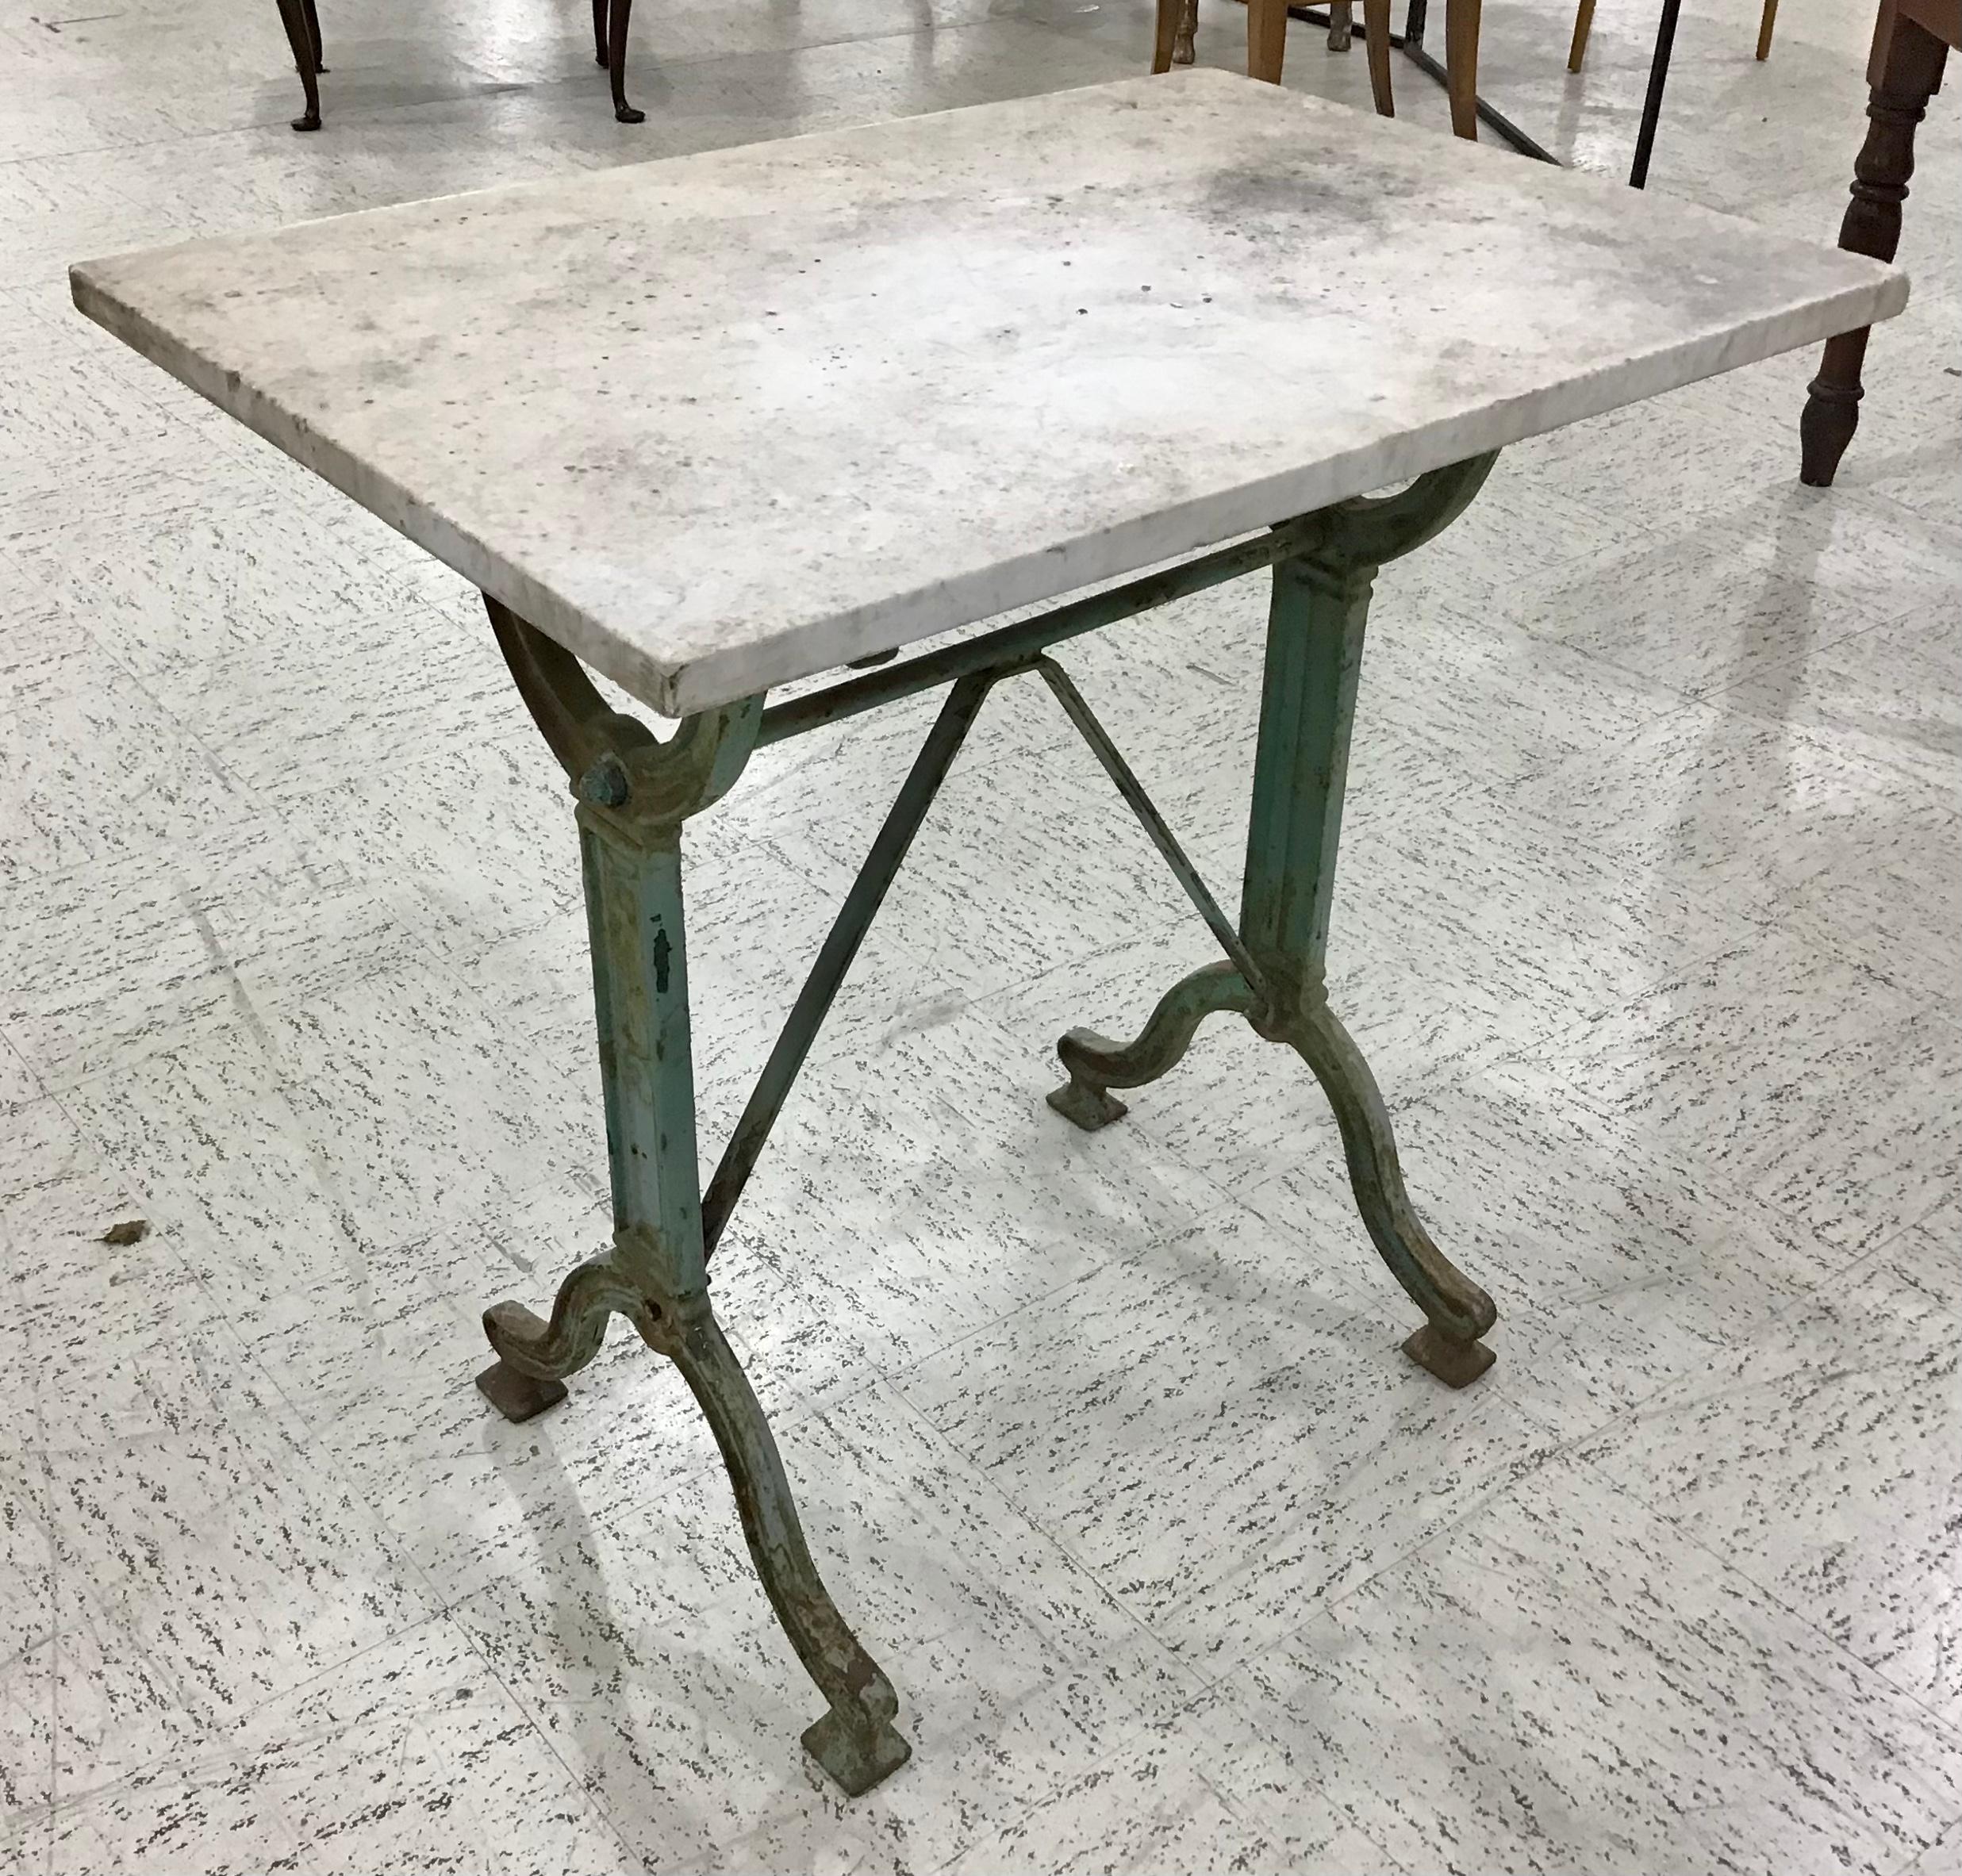 Originally used in a French brasserie during the early 20th century, this cast iron bistro table or cafe table features the original white marble top. Scrolled iron legs support the top and are joined by an X-stretcher that provides additional